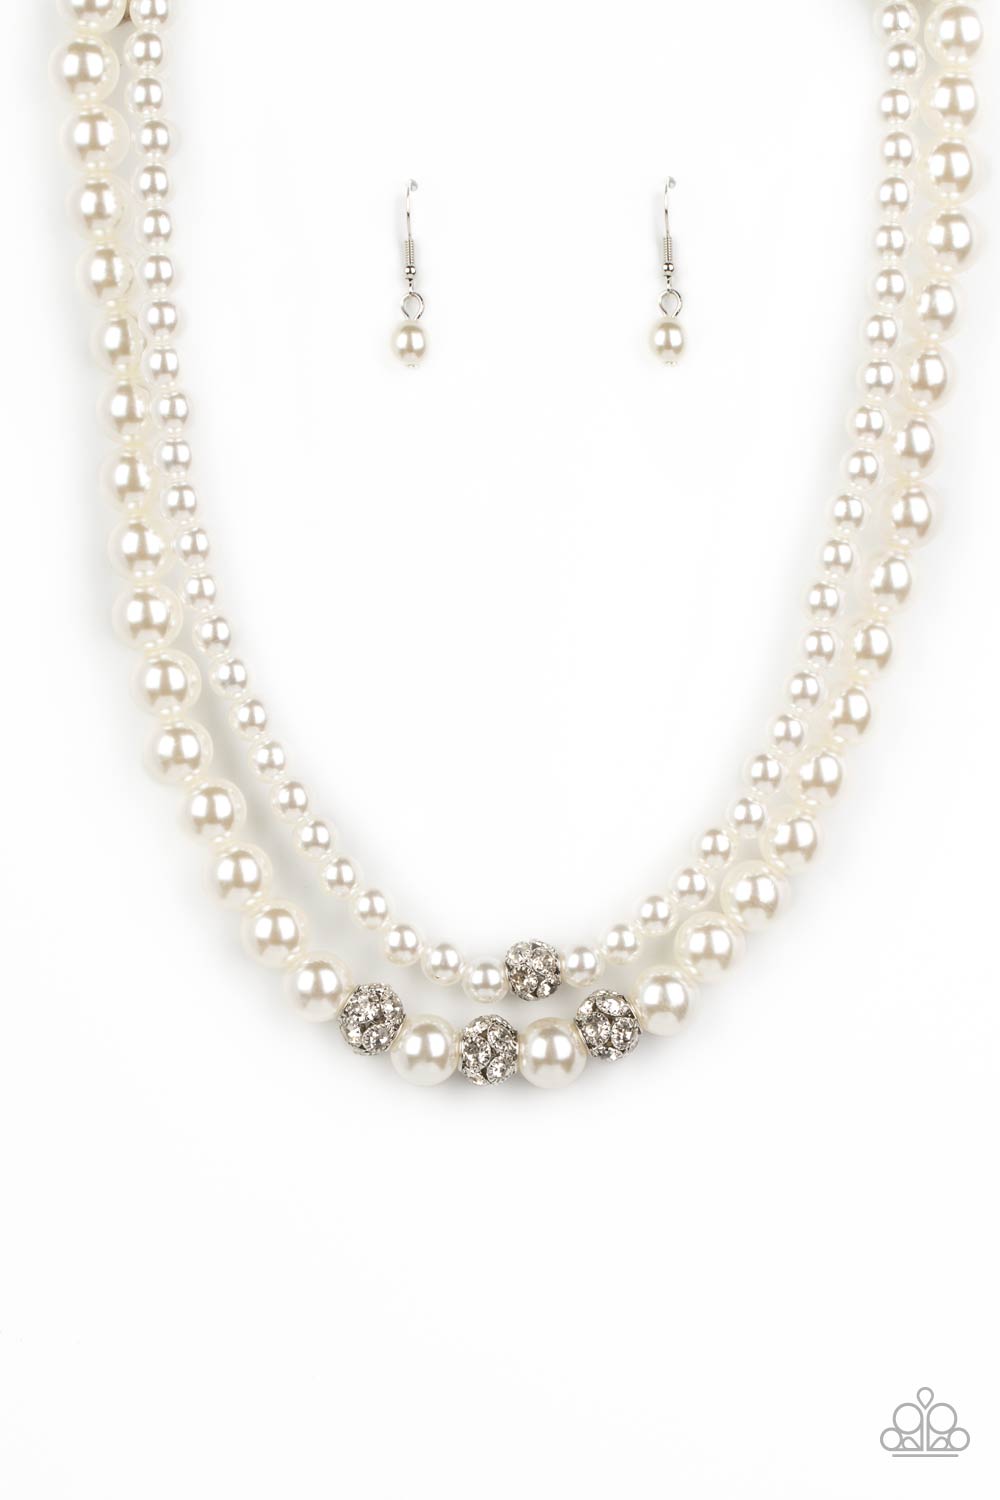 Brilliant Ballerina White Pearl Necklace - Paparazzi Accessories- lightbox - CarasShop.com - $5 Jewelry by Cara Jewels